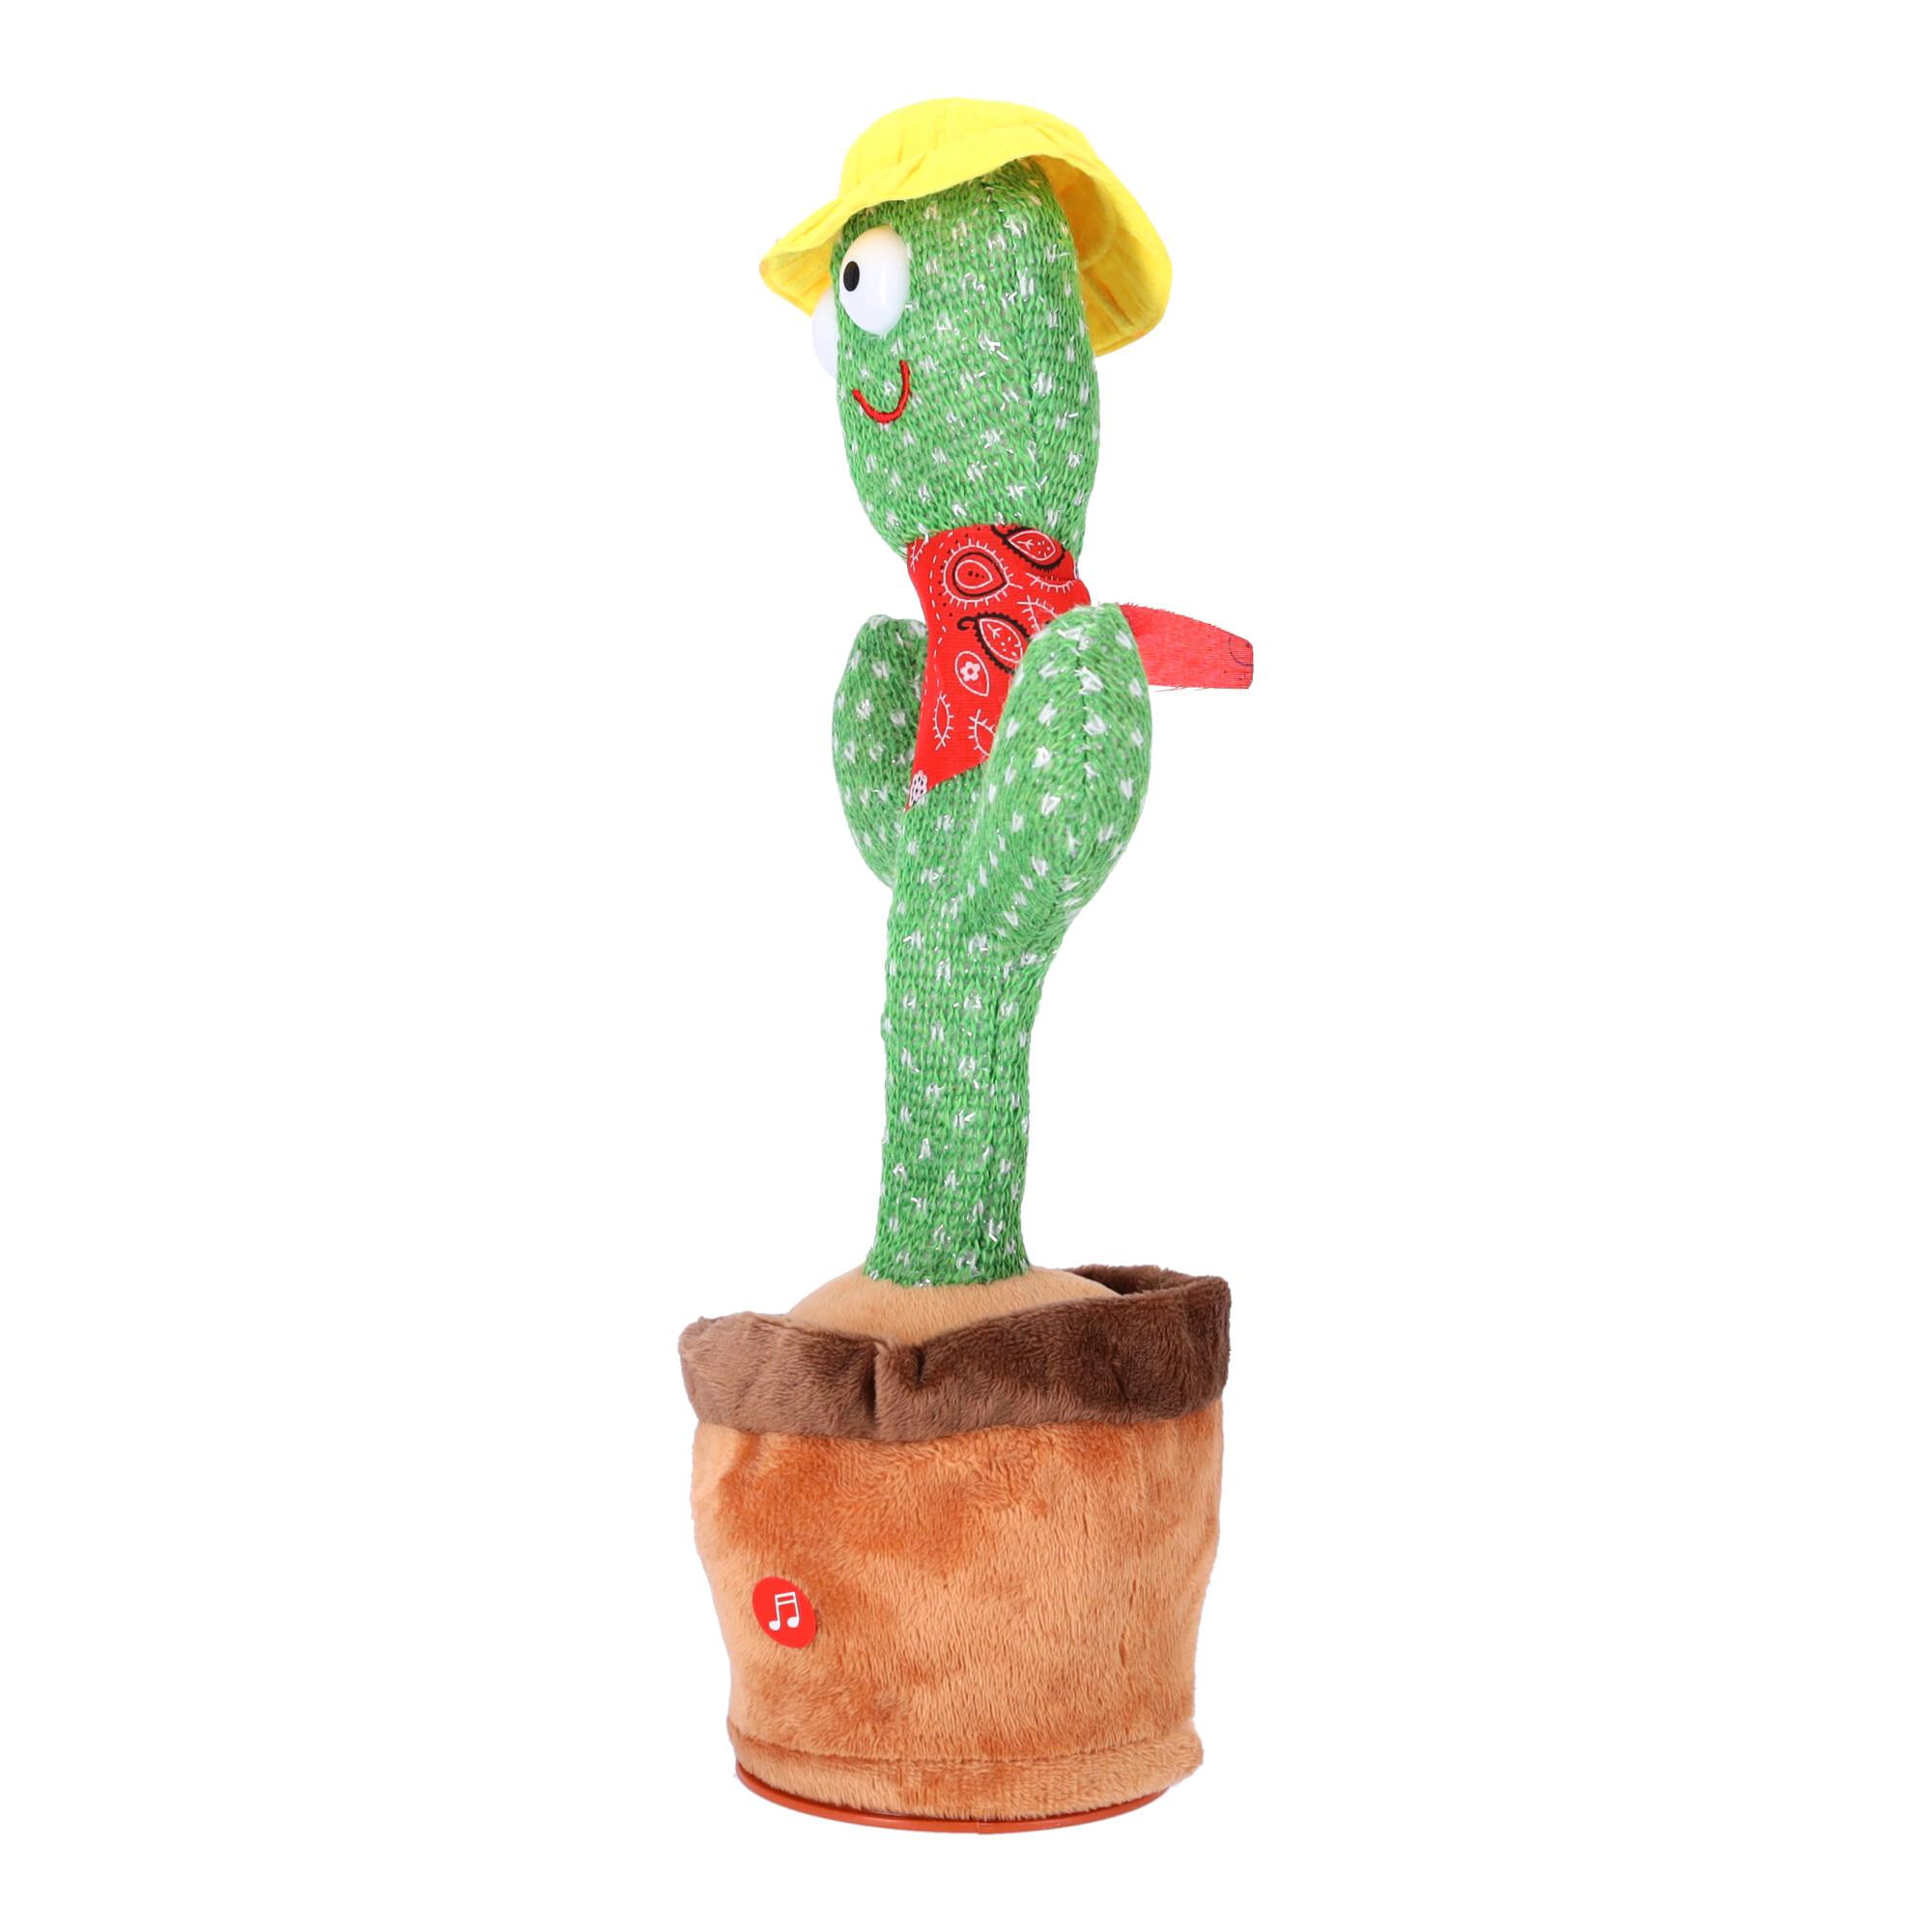 Children's toy - Dancing cactus - with red scarf and yellow hat